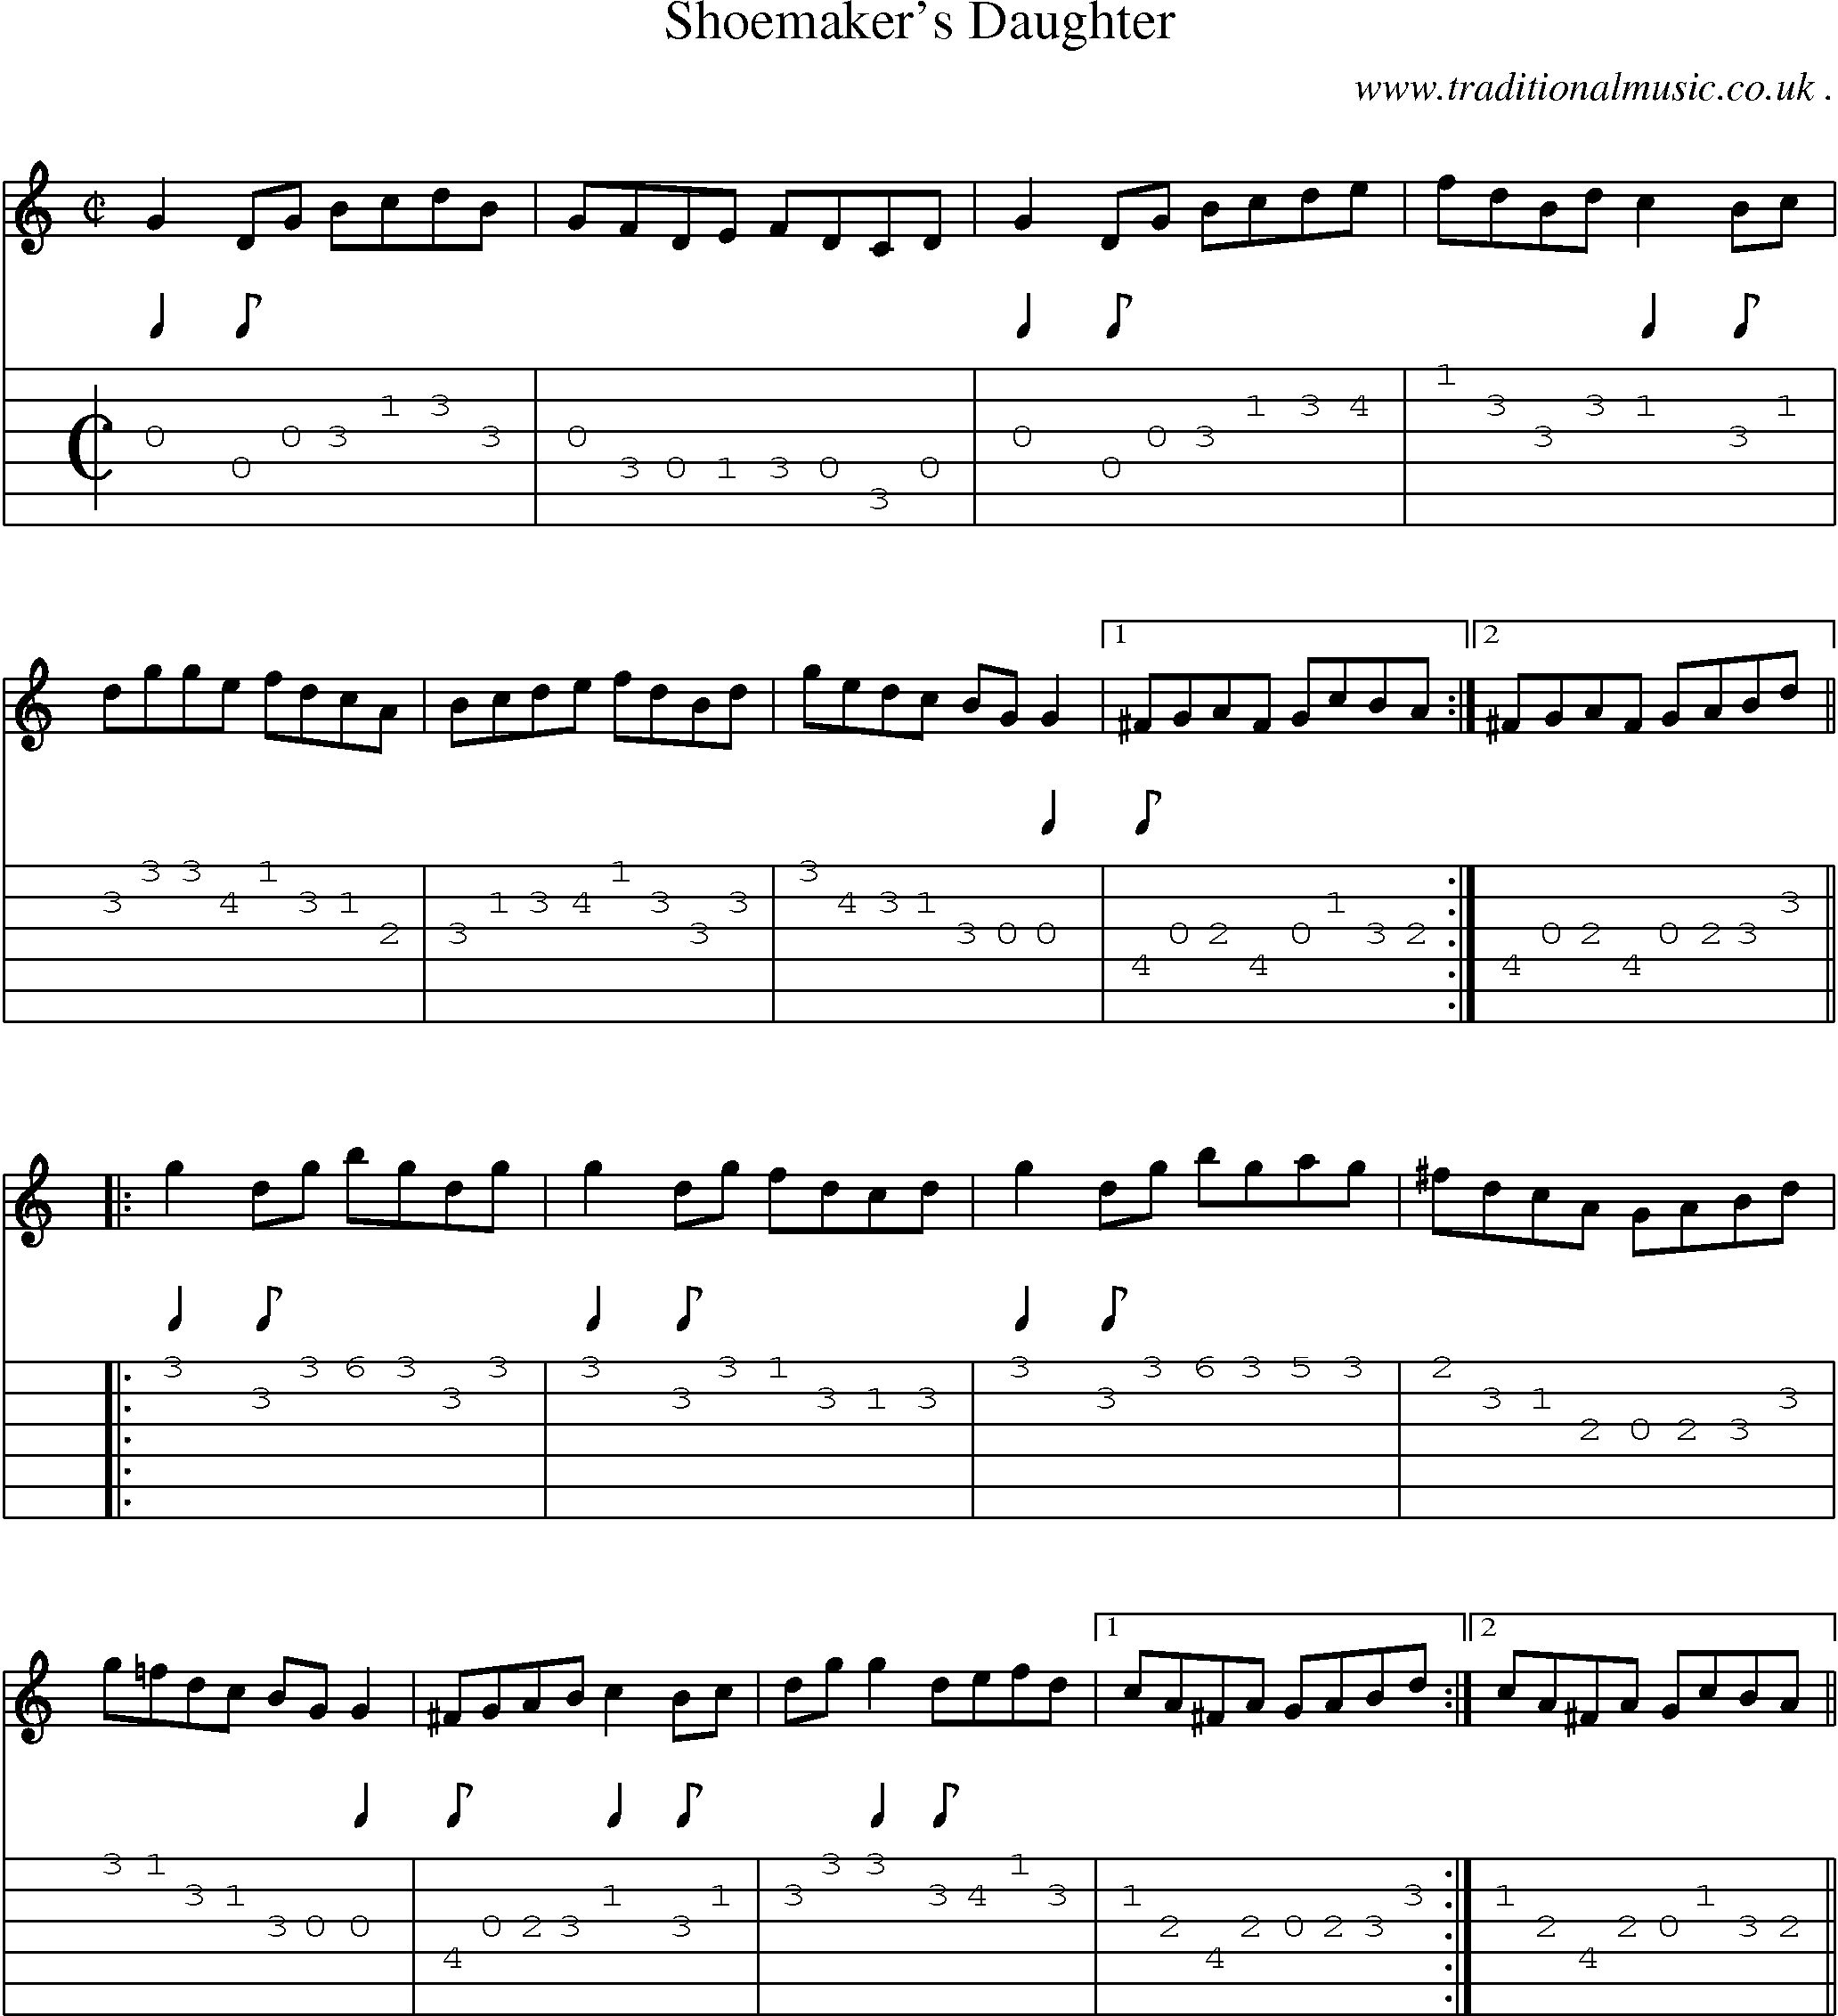 Sheet-Music and Guitar Tabs for Shoemakers Daughter